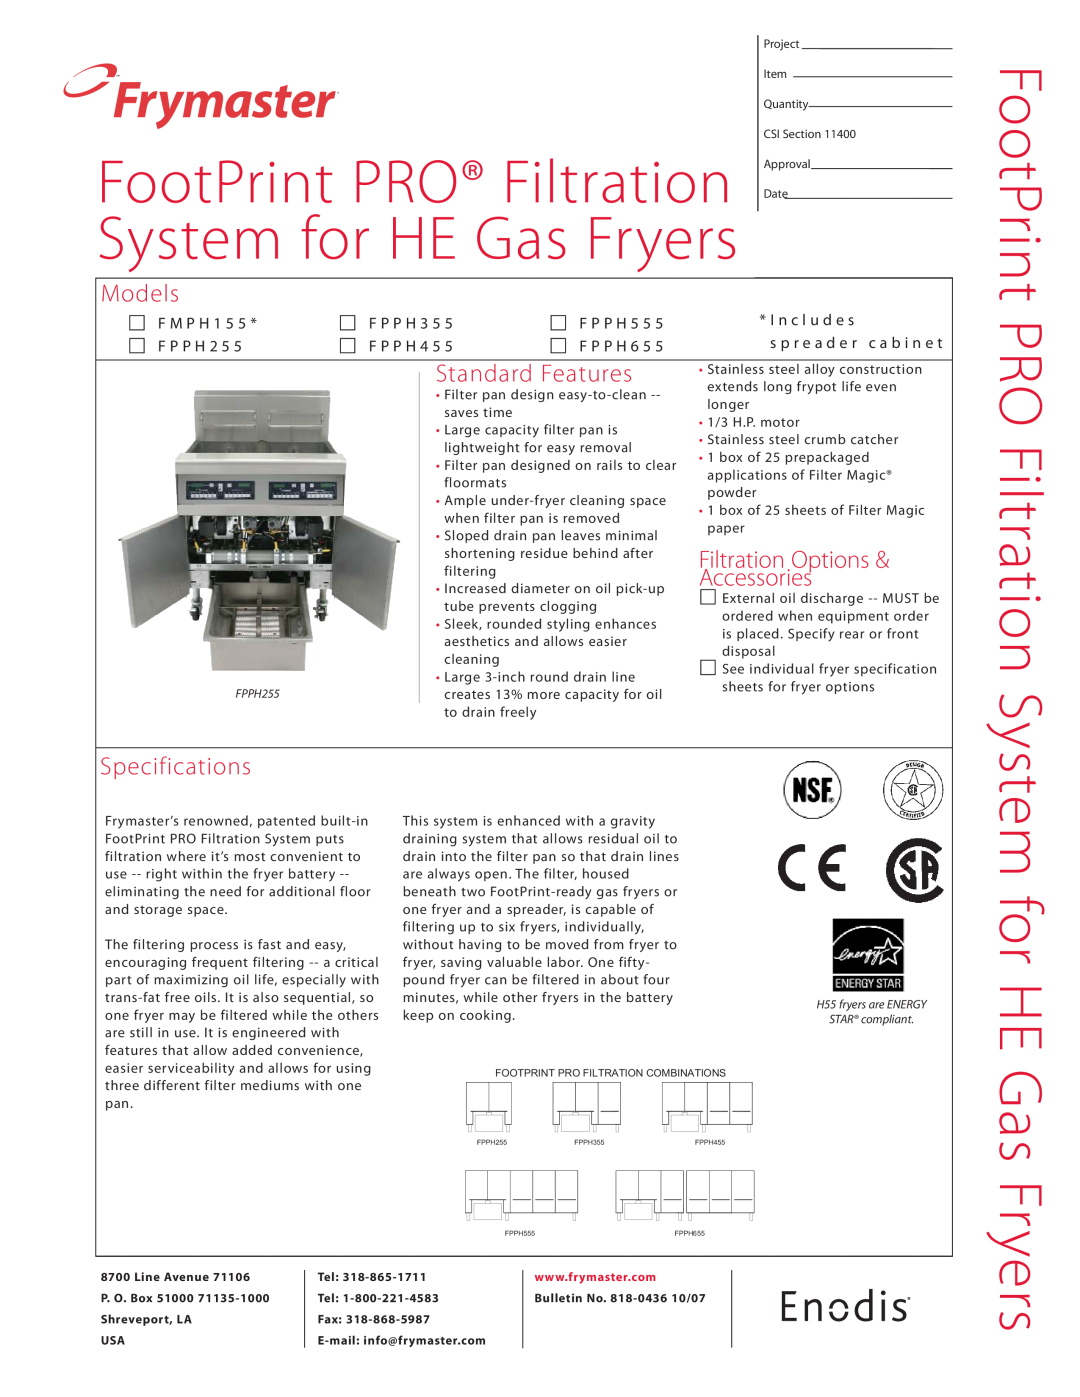 Frymaster FPPH255 specifications Frymaster, Filter pan design easy-to-clean -- saves time, 1/3 H.P. motor, FootPrint 